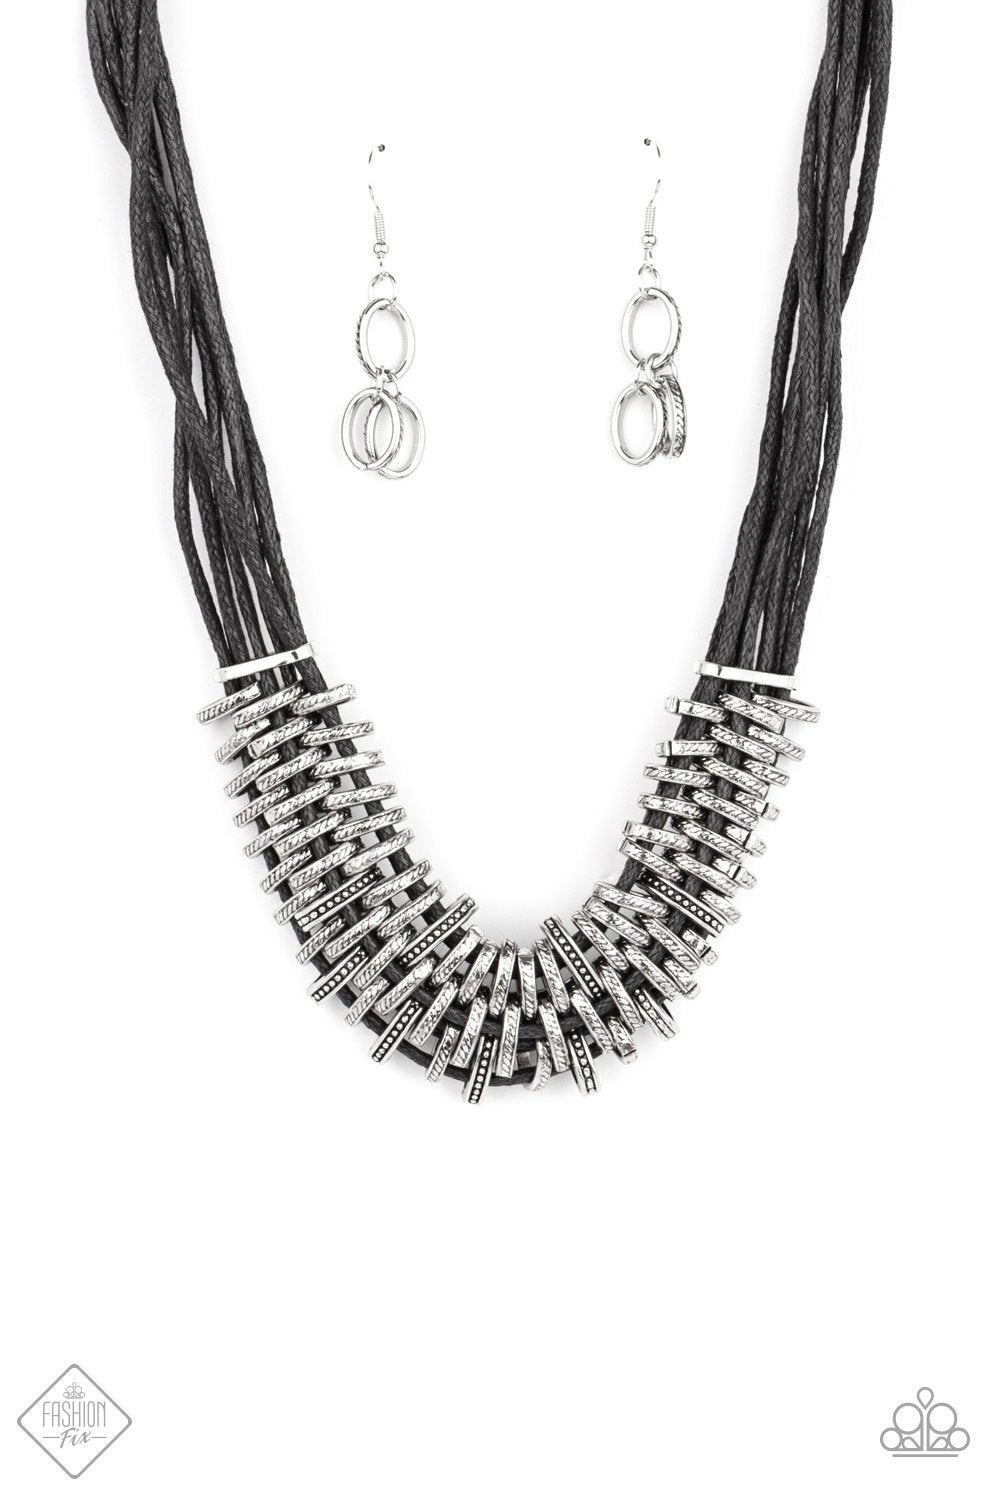 Lock, Stock and SPARKLE Black and Silver Necklace - Paparazzi Accessories- lightbox - CarasShop.com - $5 Jewelry by Cara Jewels